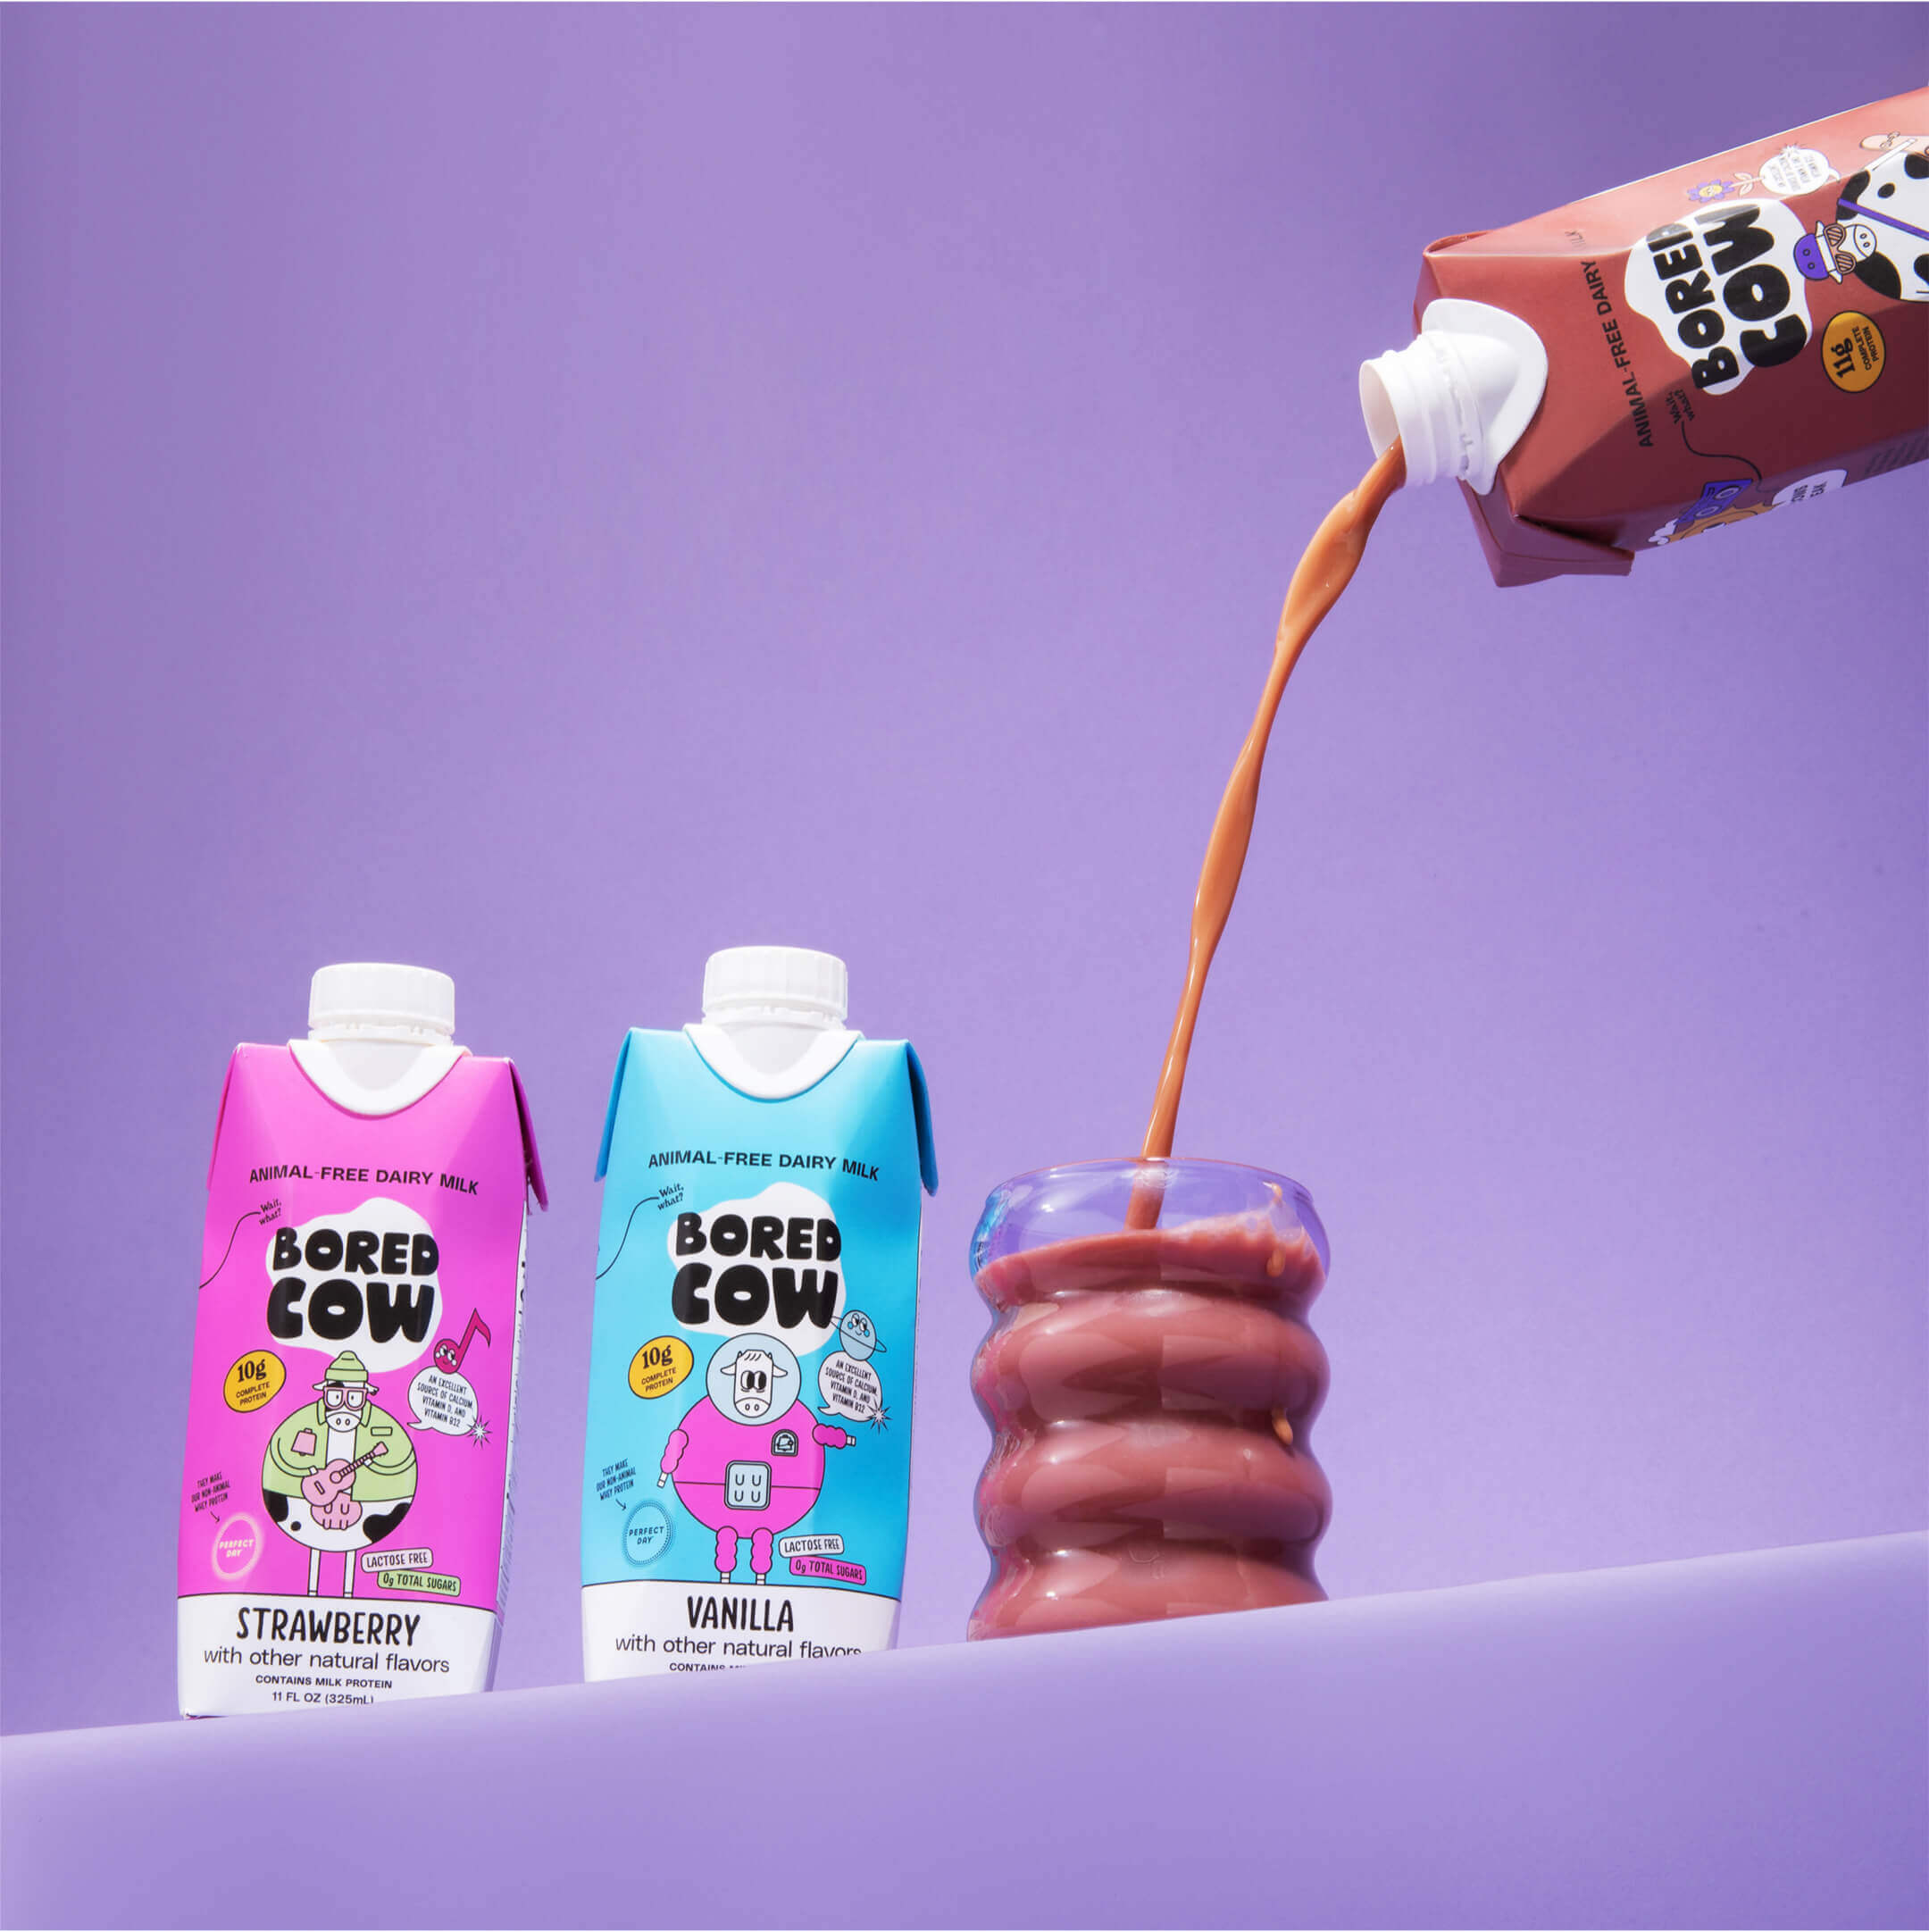 bored cow packaging design